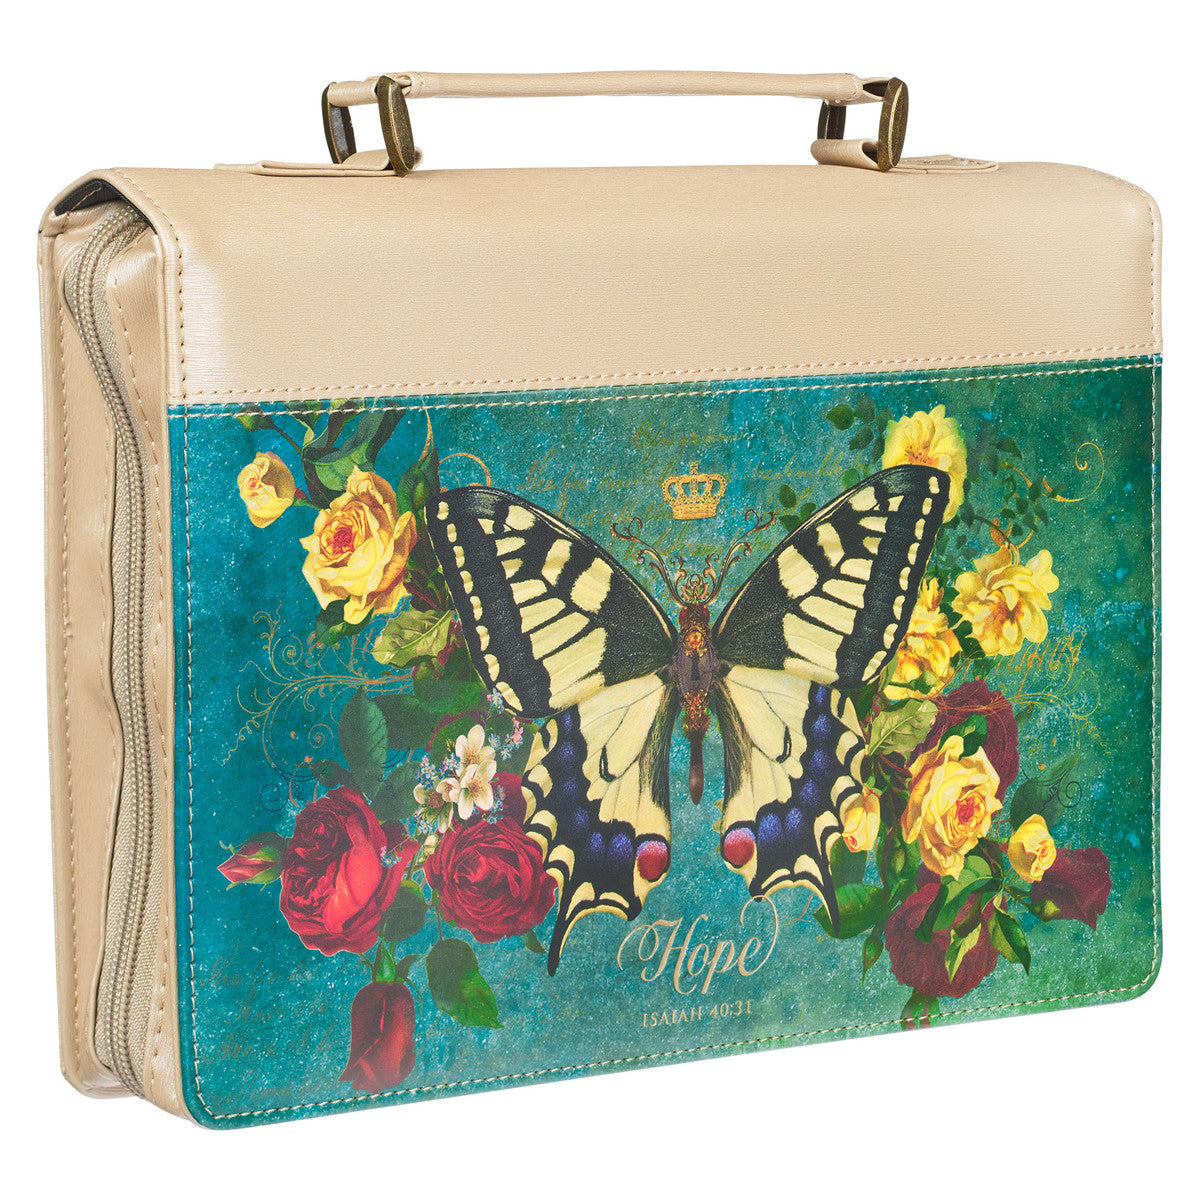 Hope Butterfly Teal Faux Leather Fashion Bible Cover - Isaiah 40:31